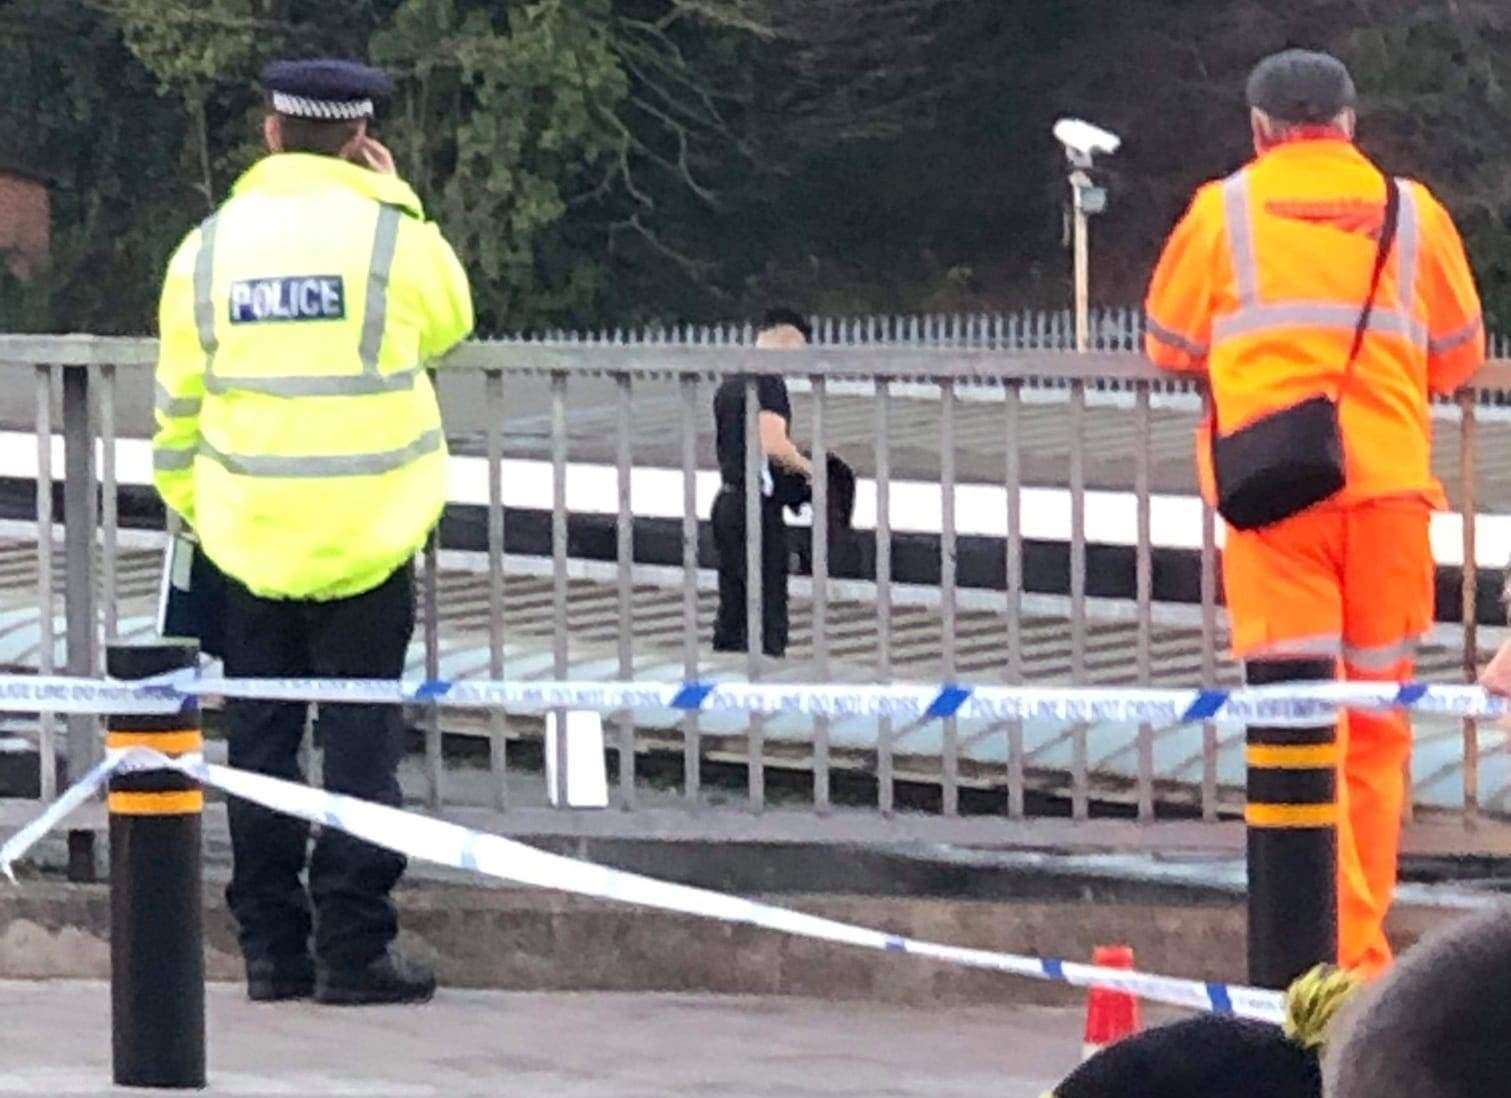 Emergency services were called to Chatham railway station to deal with an incident in which a man was spotted on the roof. Picture: Charlotte Barritt.